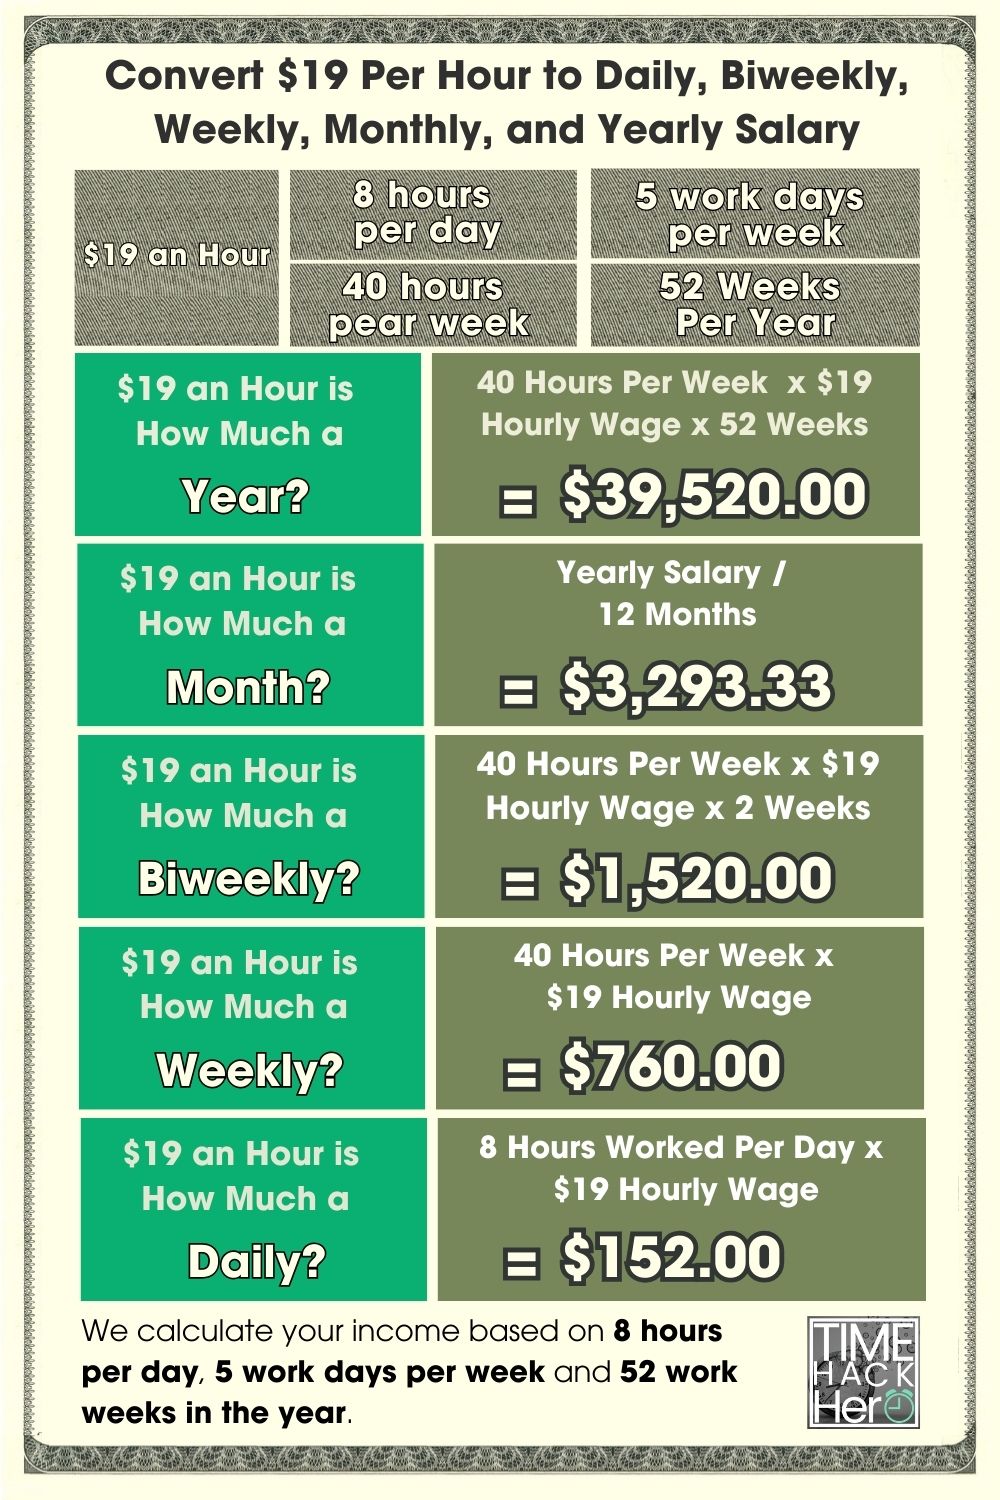 Convert $19 Per Hour to Daily, Biweekly, Weekly, Monthly, and Yearly Salary